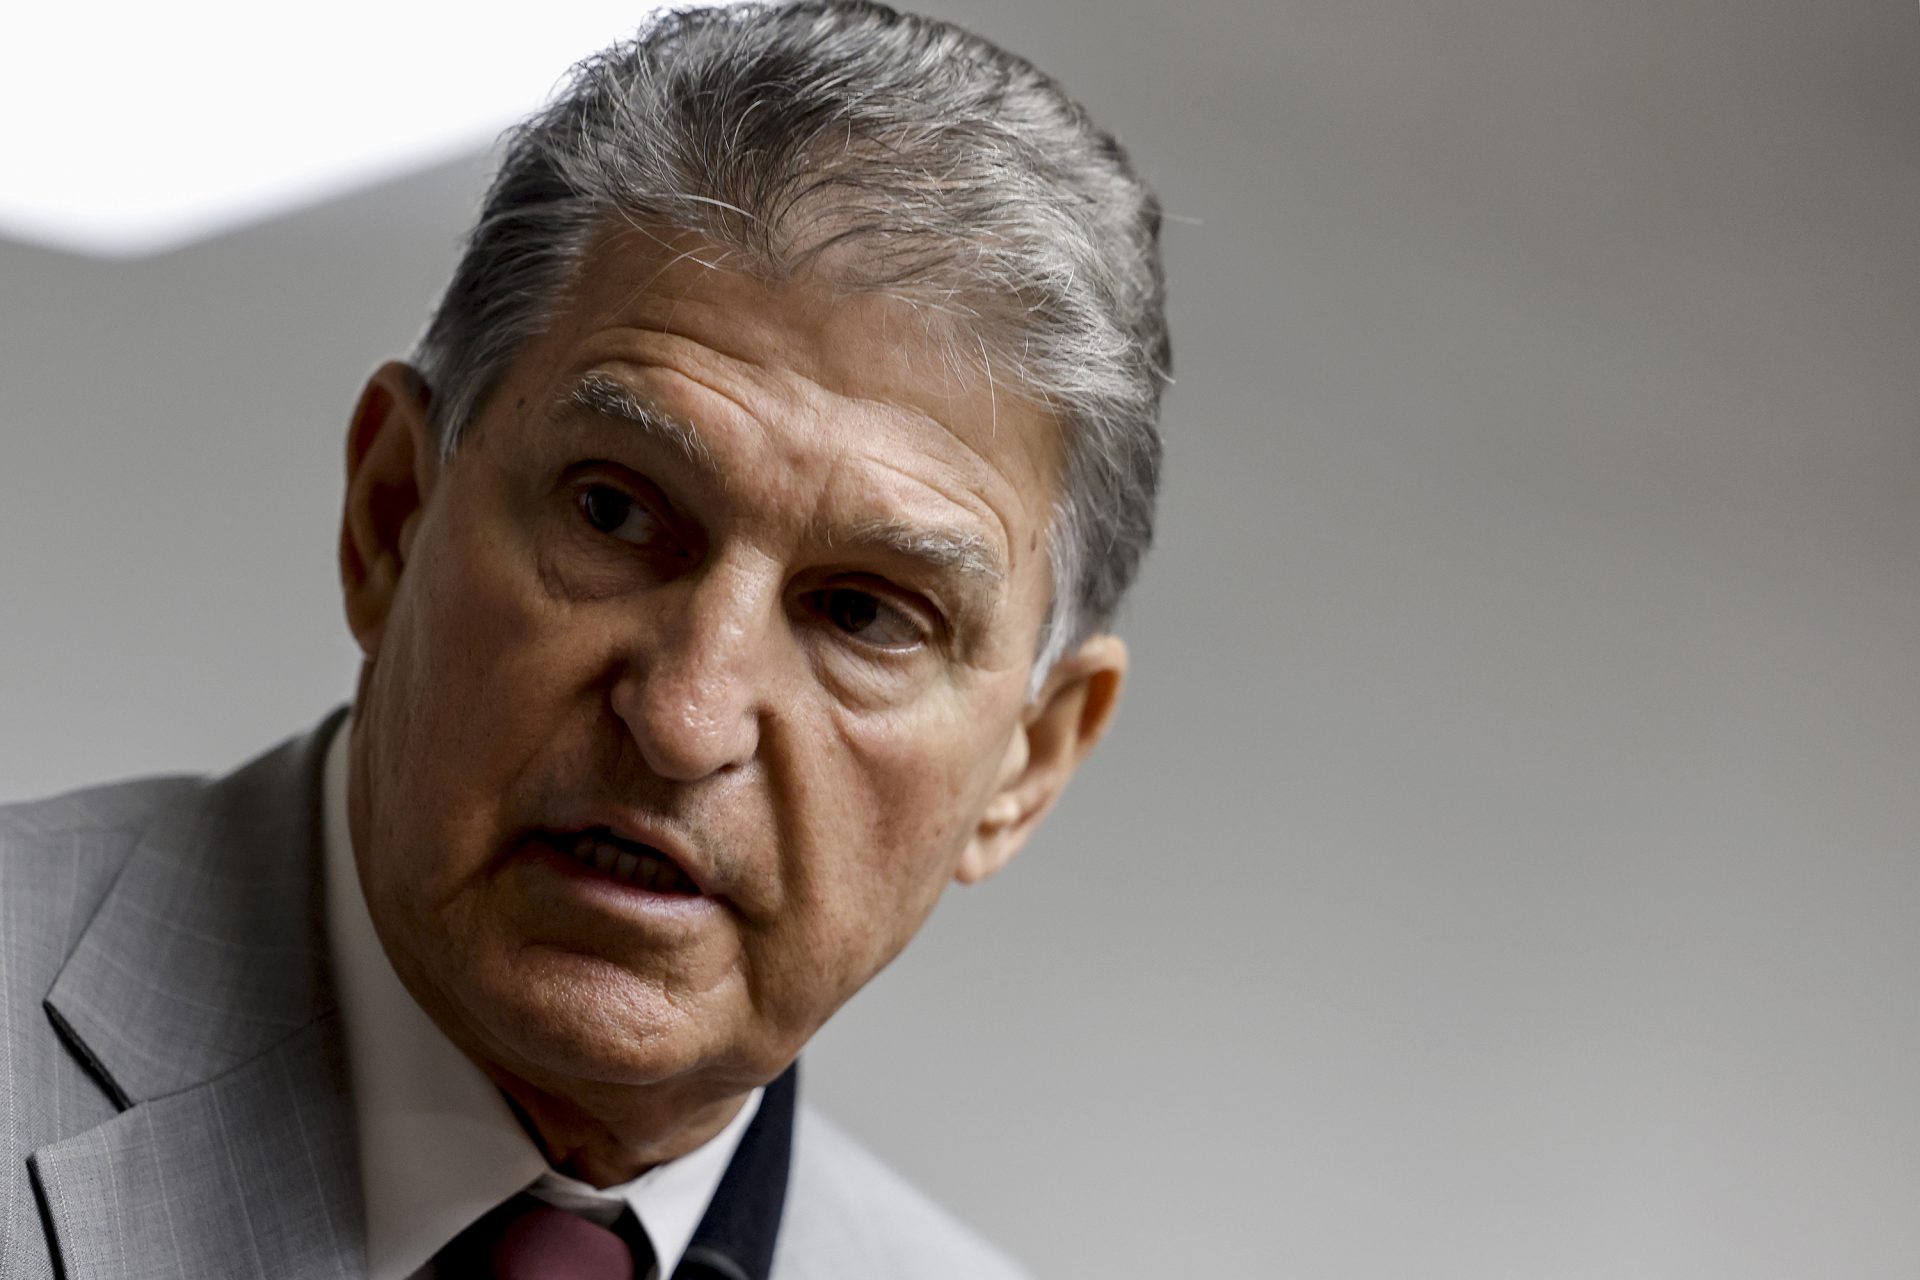 manchin-floats-bill-to-end-ev-tax-credits-for-unqualified-cars-cpa